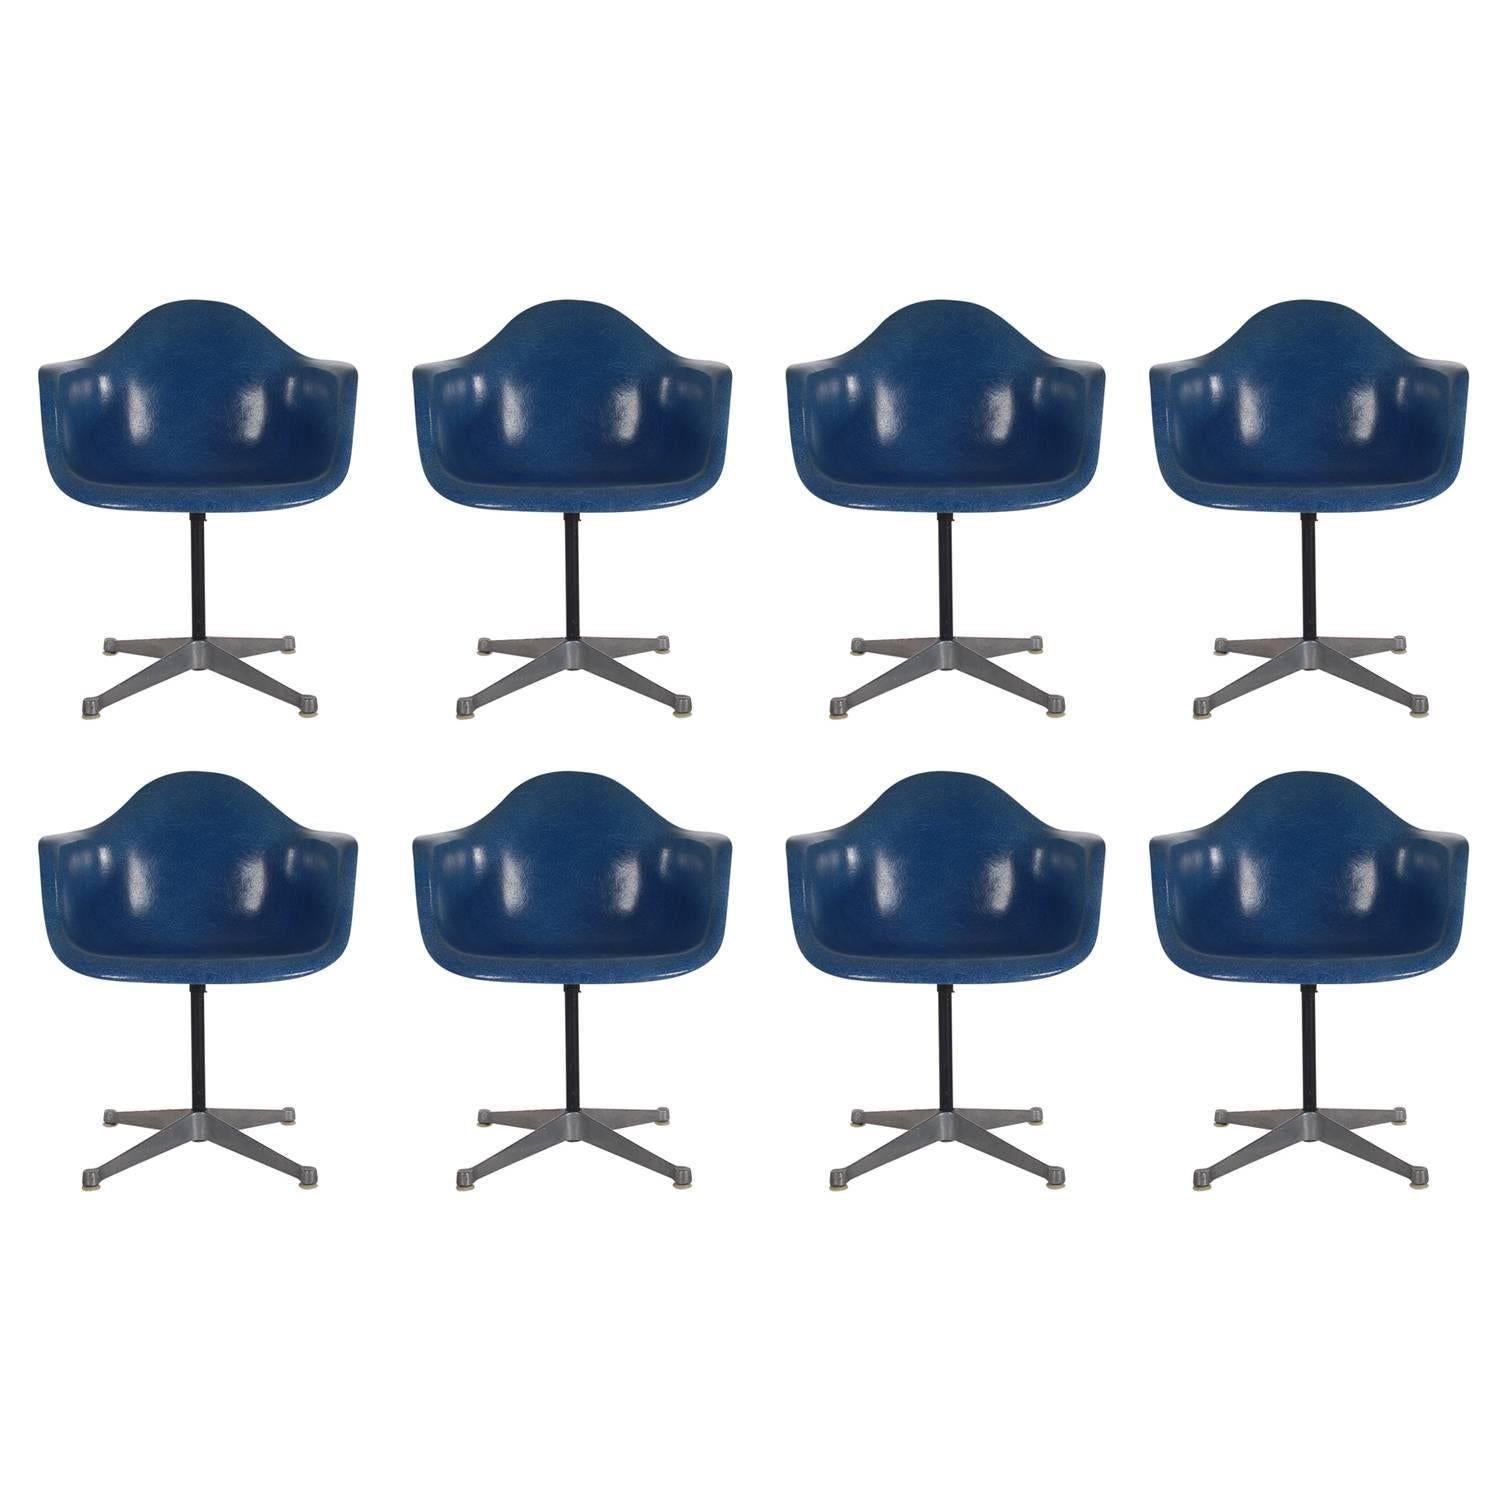 Mid-Century Charles Eames Herman Miller Fiberglass Dining Chairs in Royal Blue